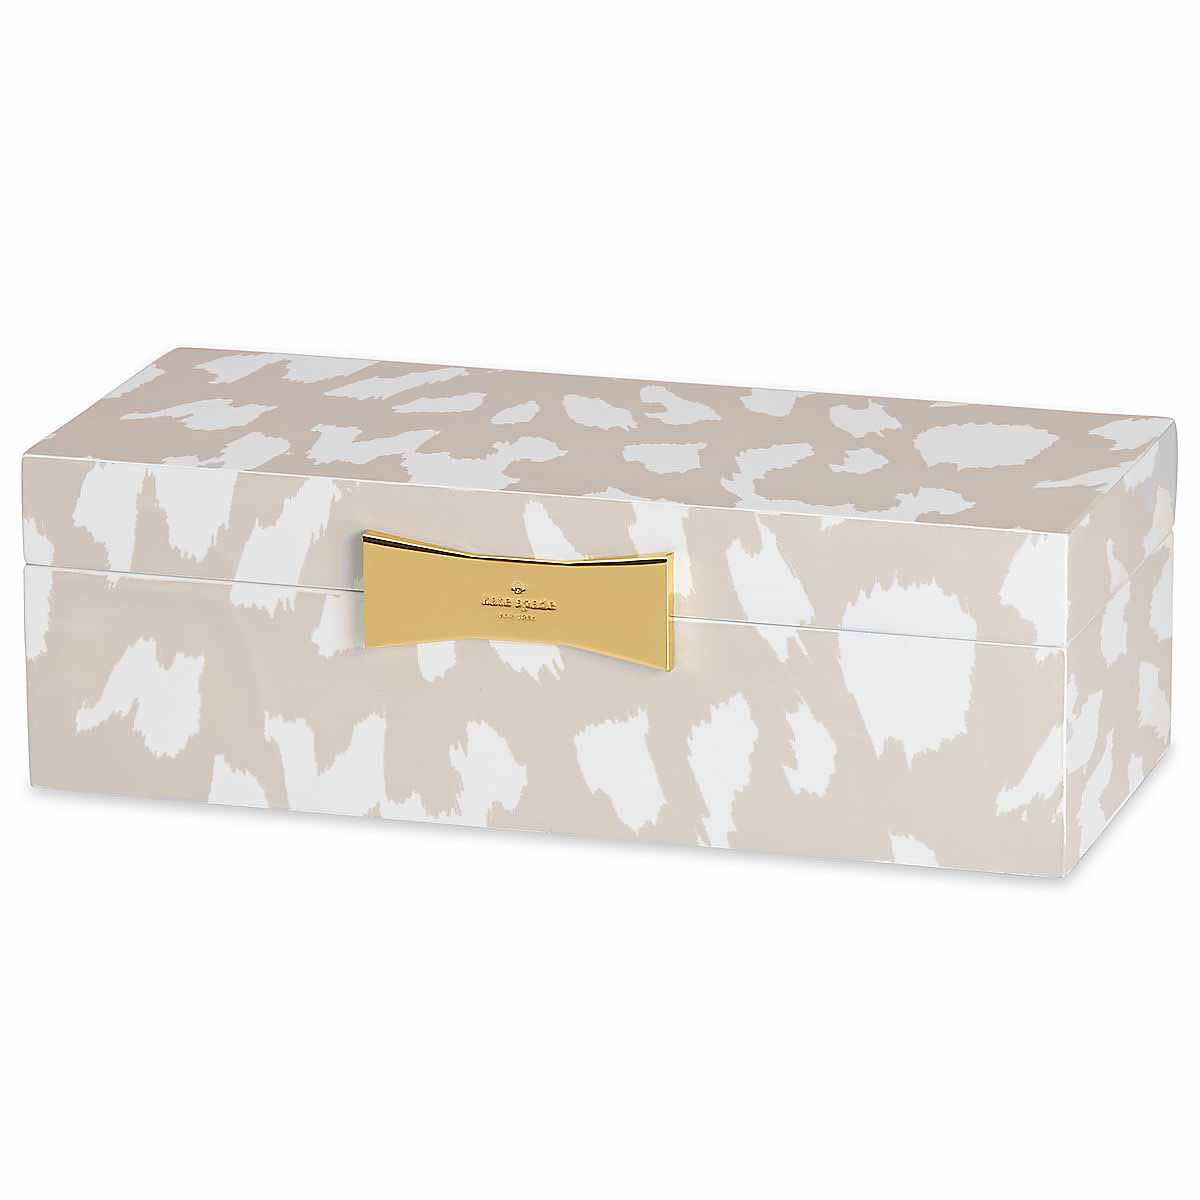 Kate Spade New York, Lenox Outpost Gifting Lg Rect Jewelry Box, Animal